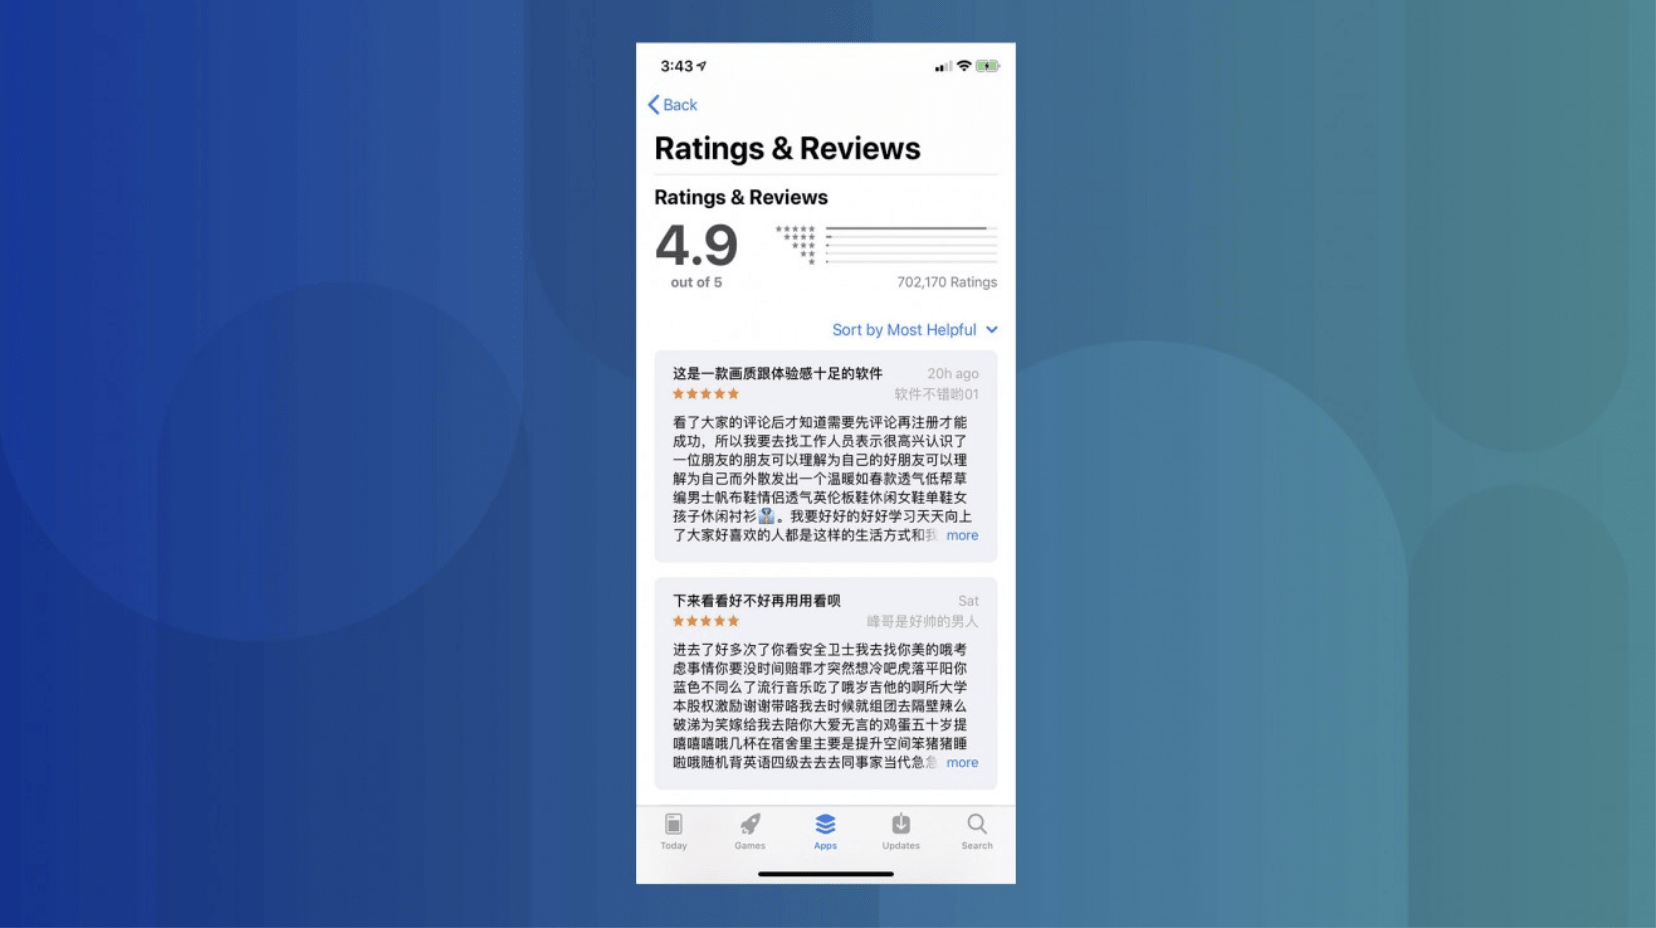 five star reviews with comments unrelated to the app